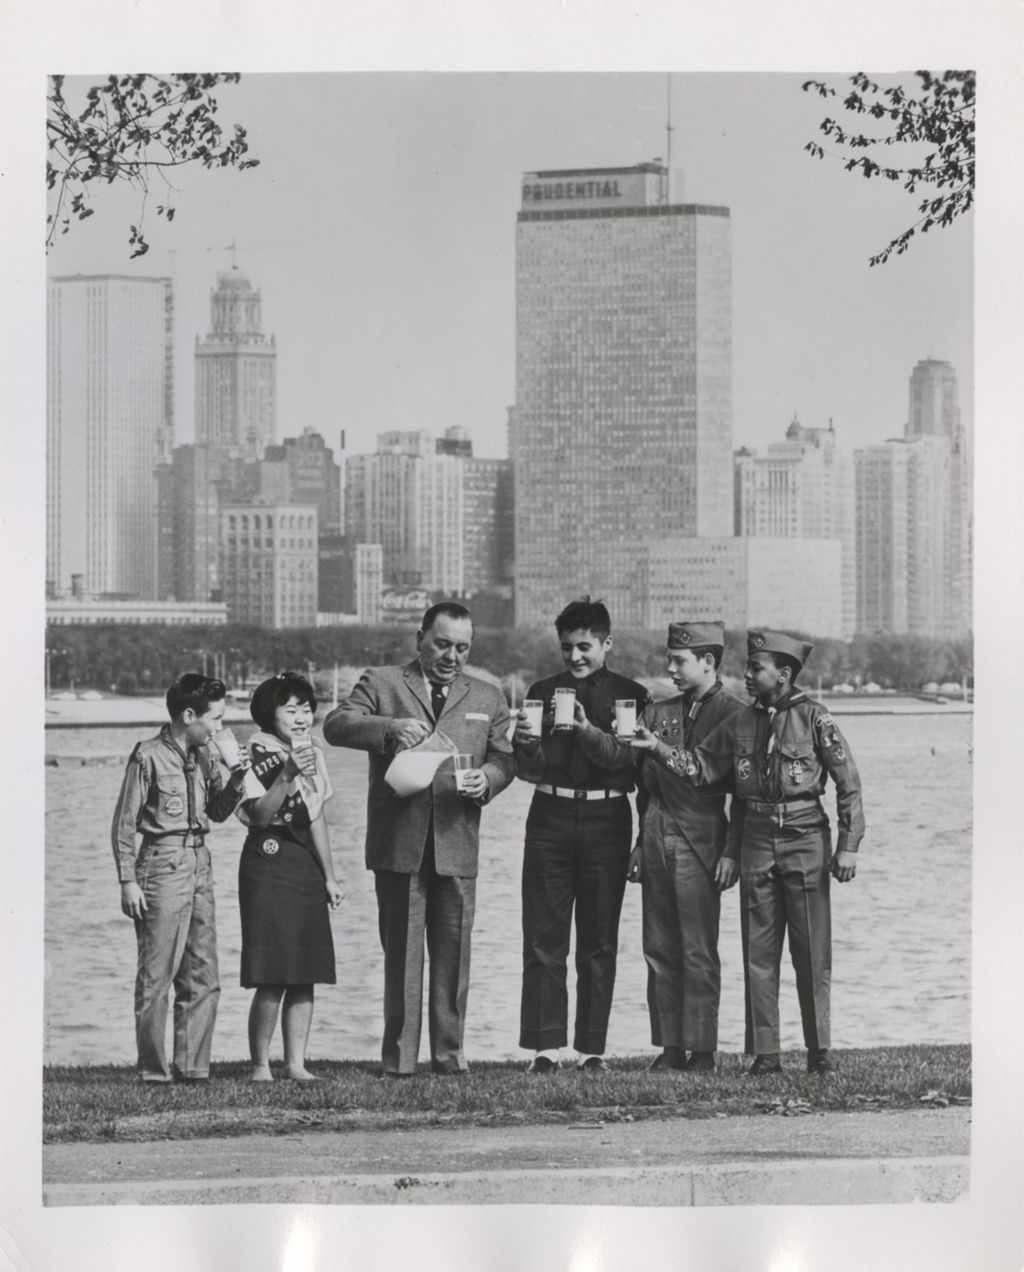 Miniature of Richard J. Daley pouring milk with Scouts on lakefront